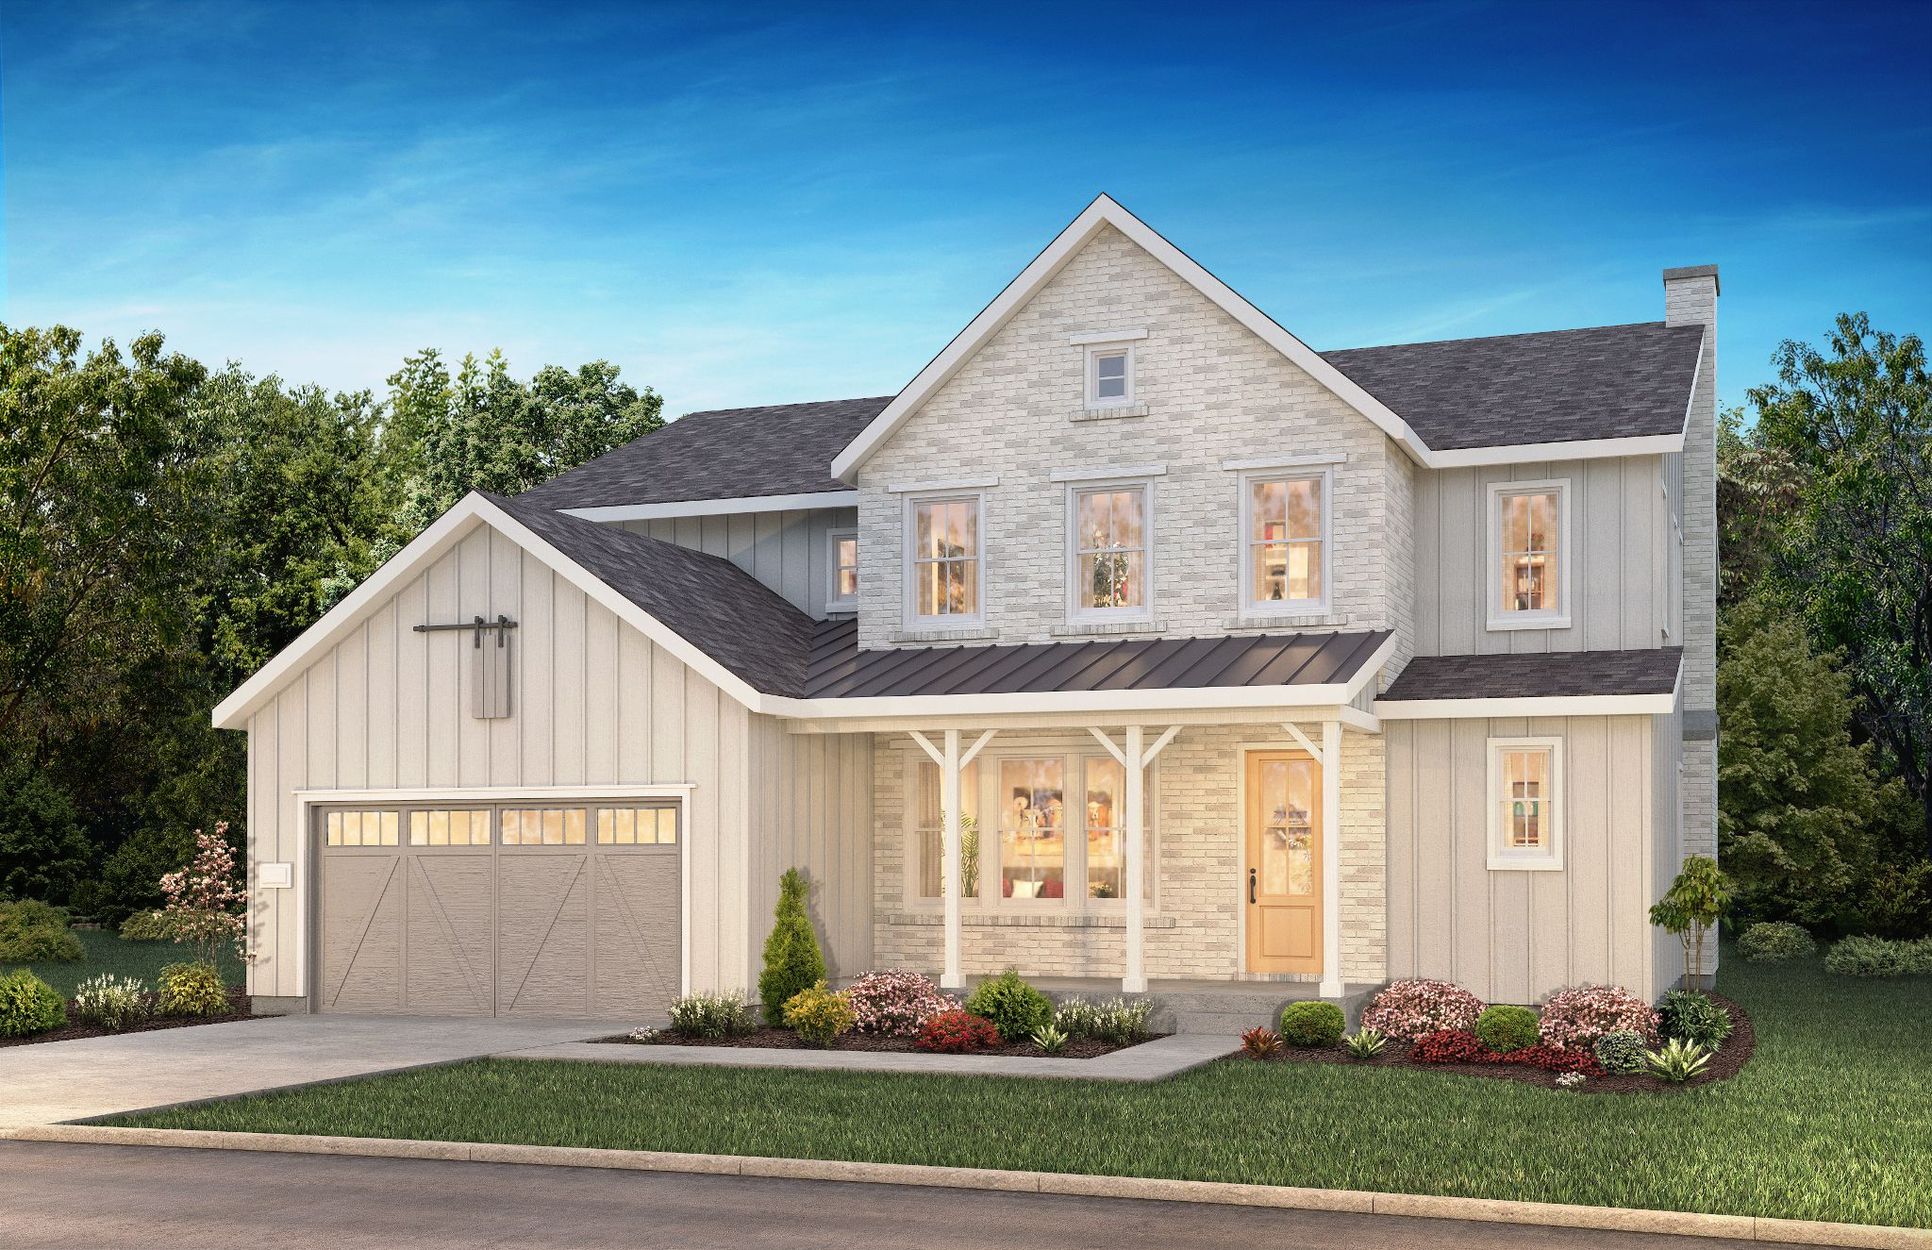 The Canyons Luxe Stratton Elevation A:Exterior A: Modern Farmhouse